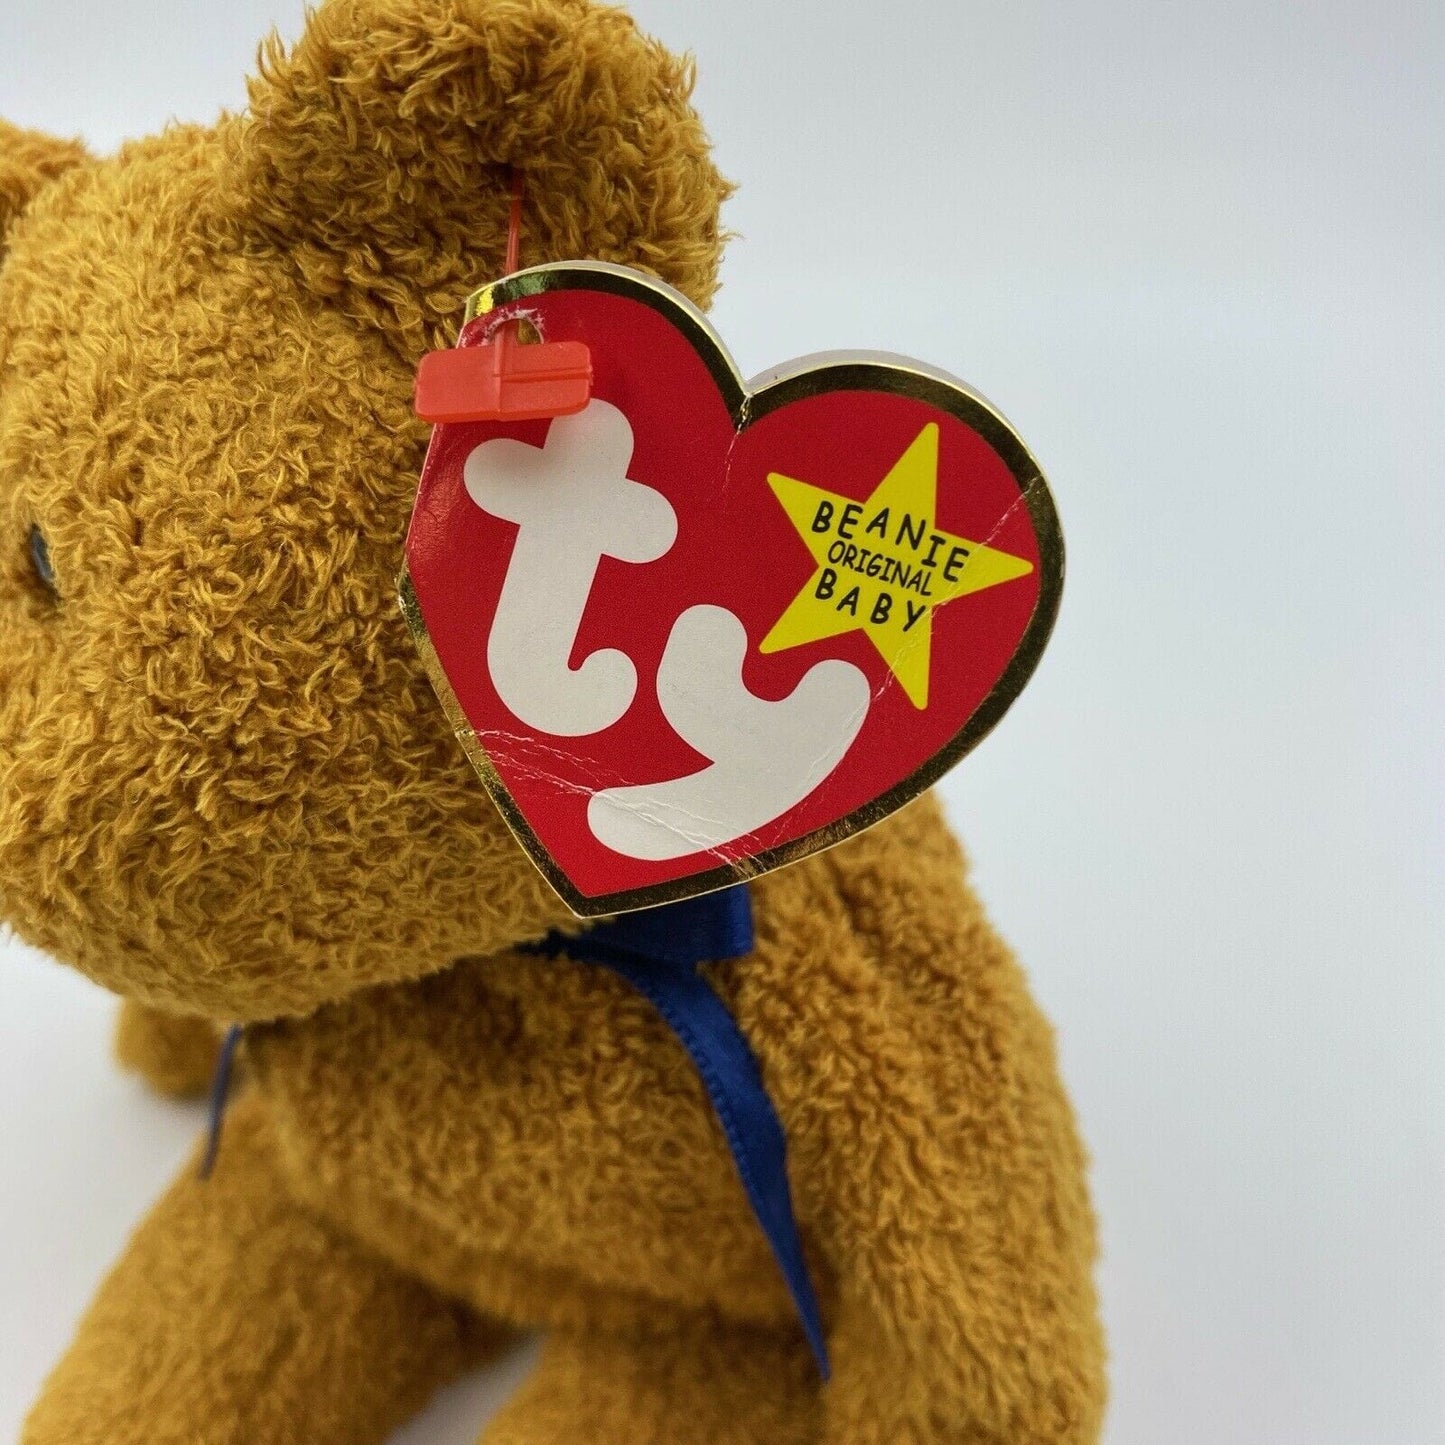 Ty Original Beanie Babies “Fuzz” The Bear 1999 EXCELLENT Condition - Tag Errors